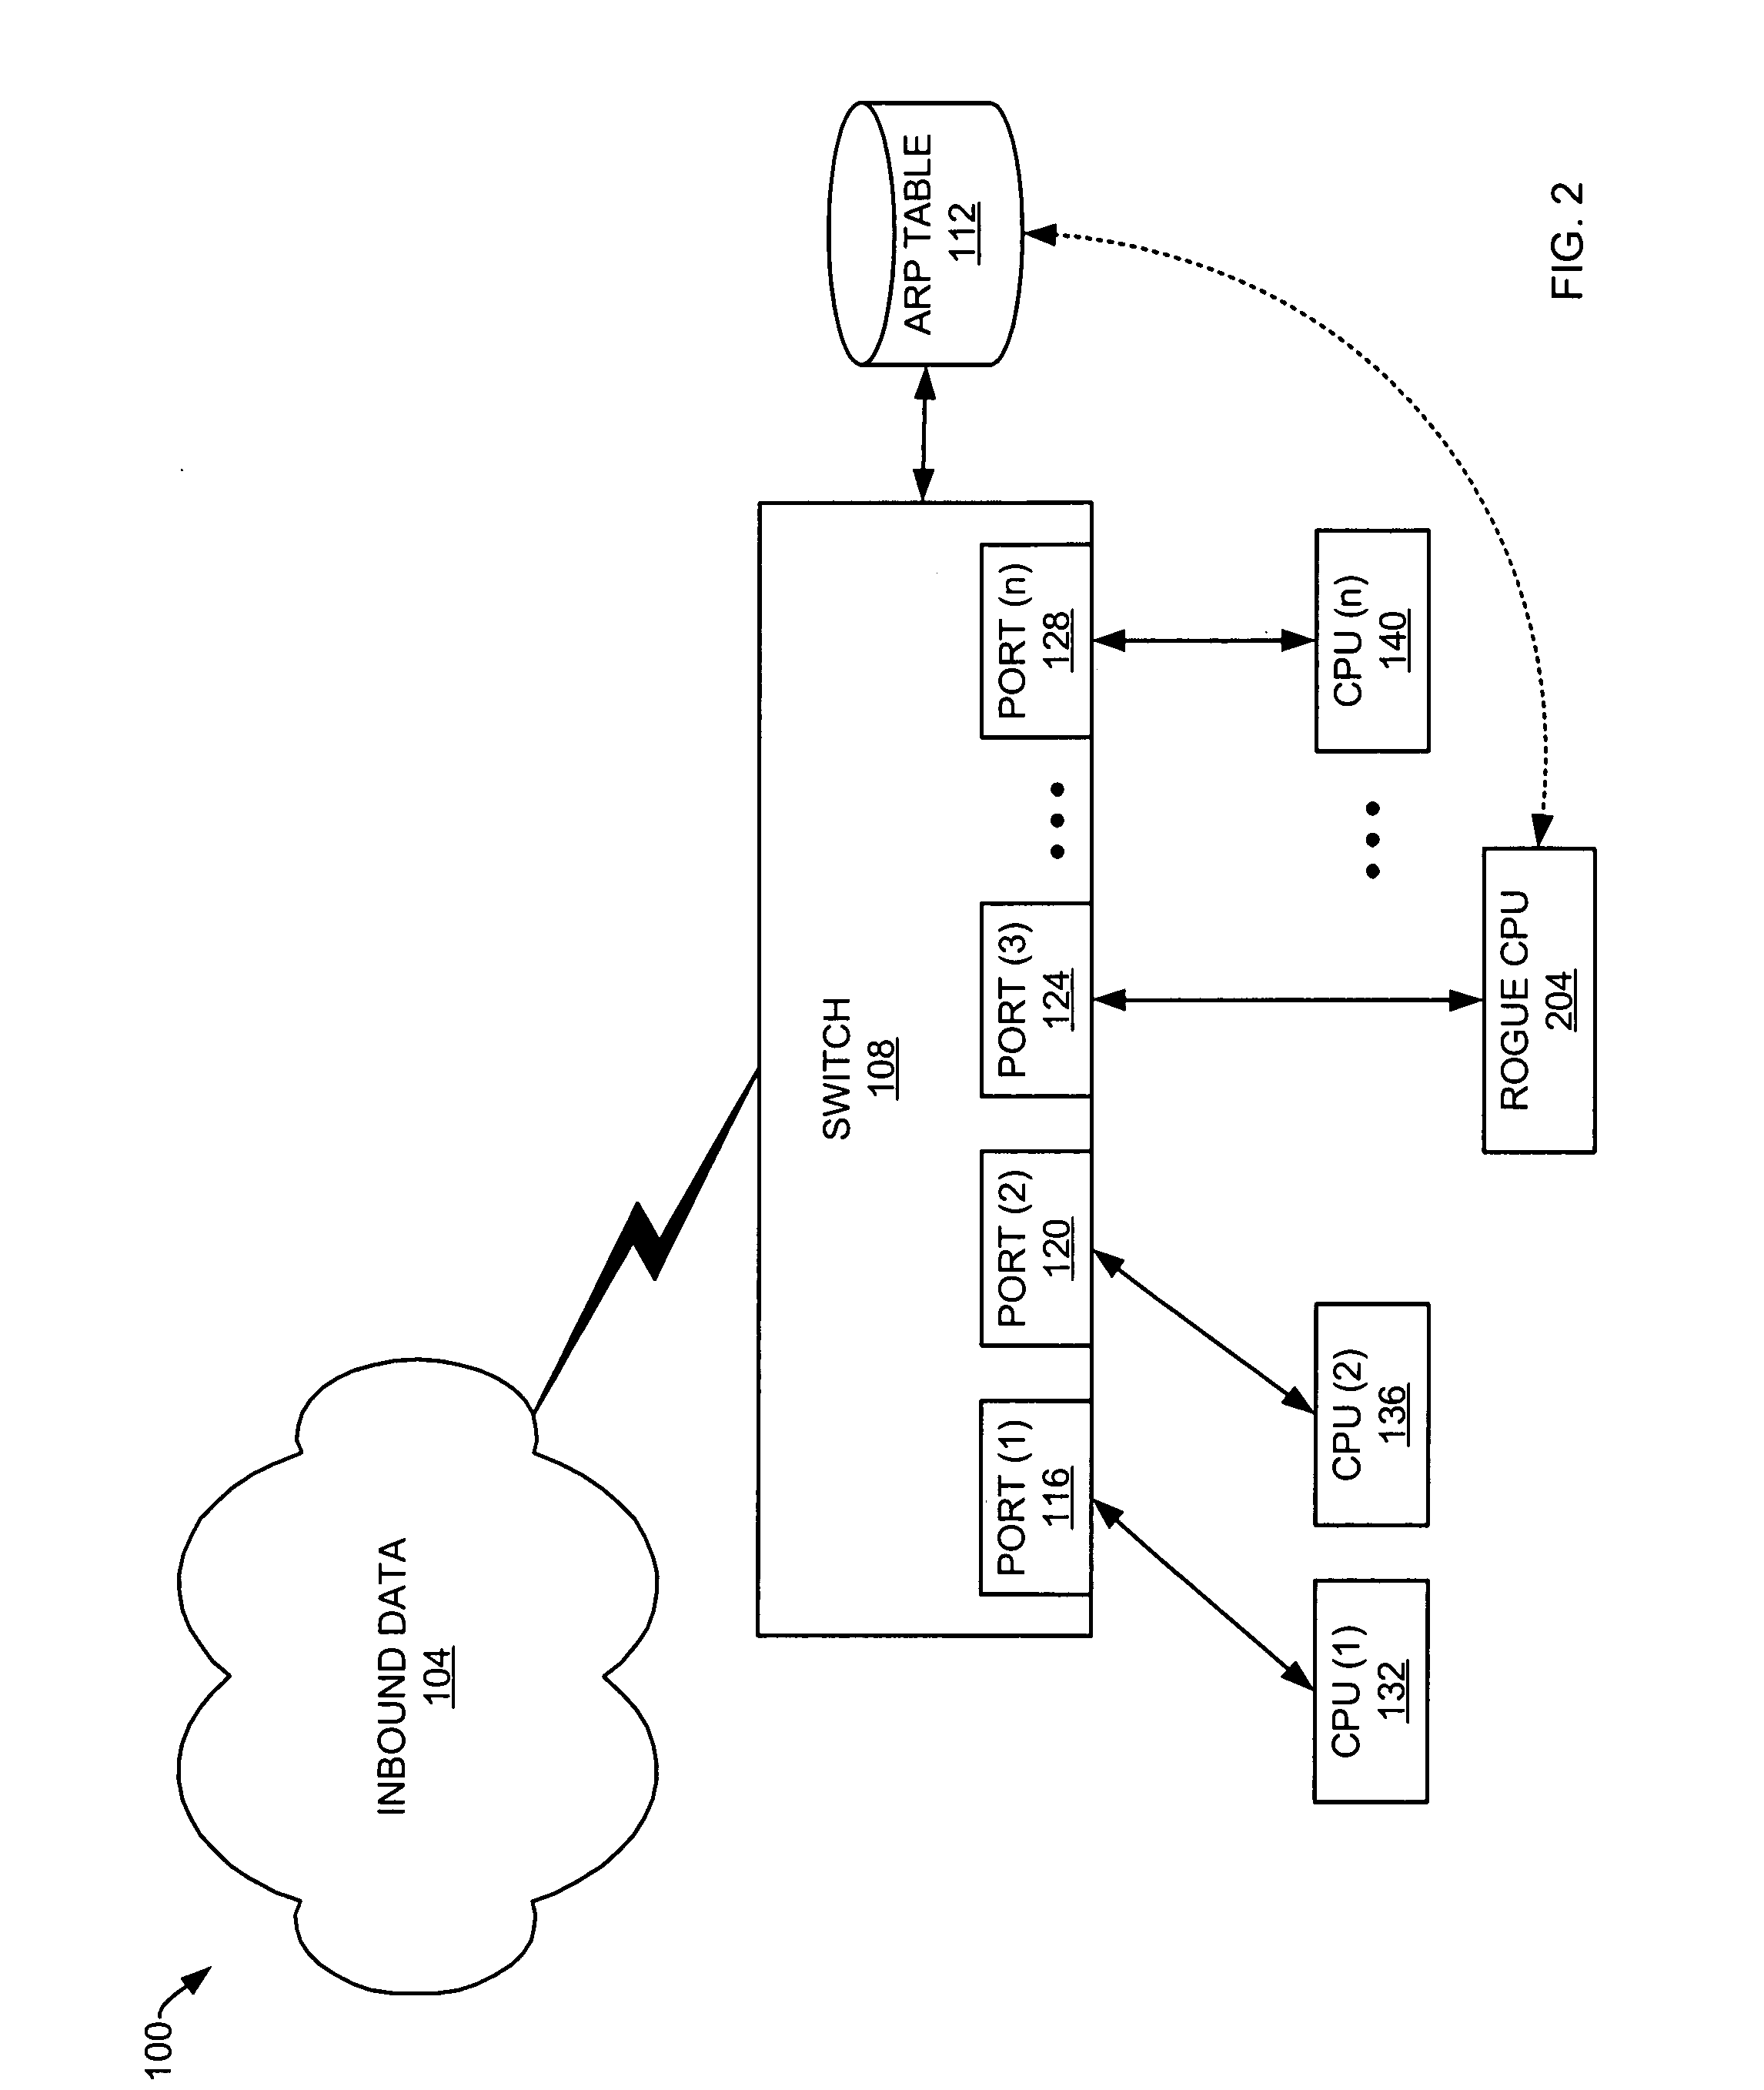 Methods and devices for preventing ARP cache poisoning